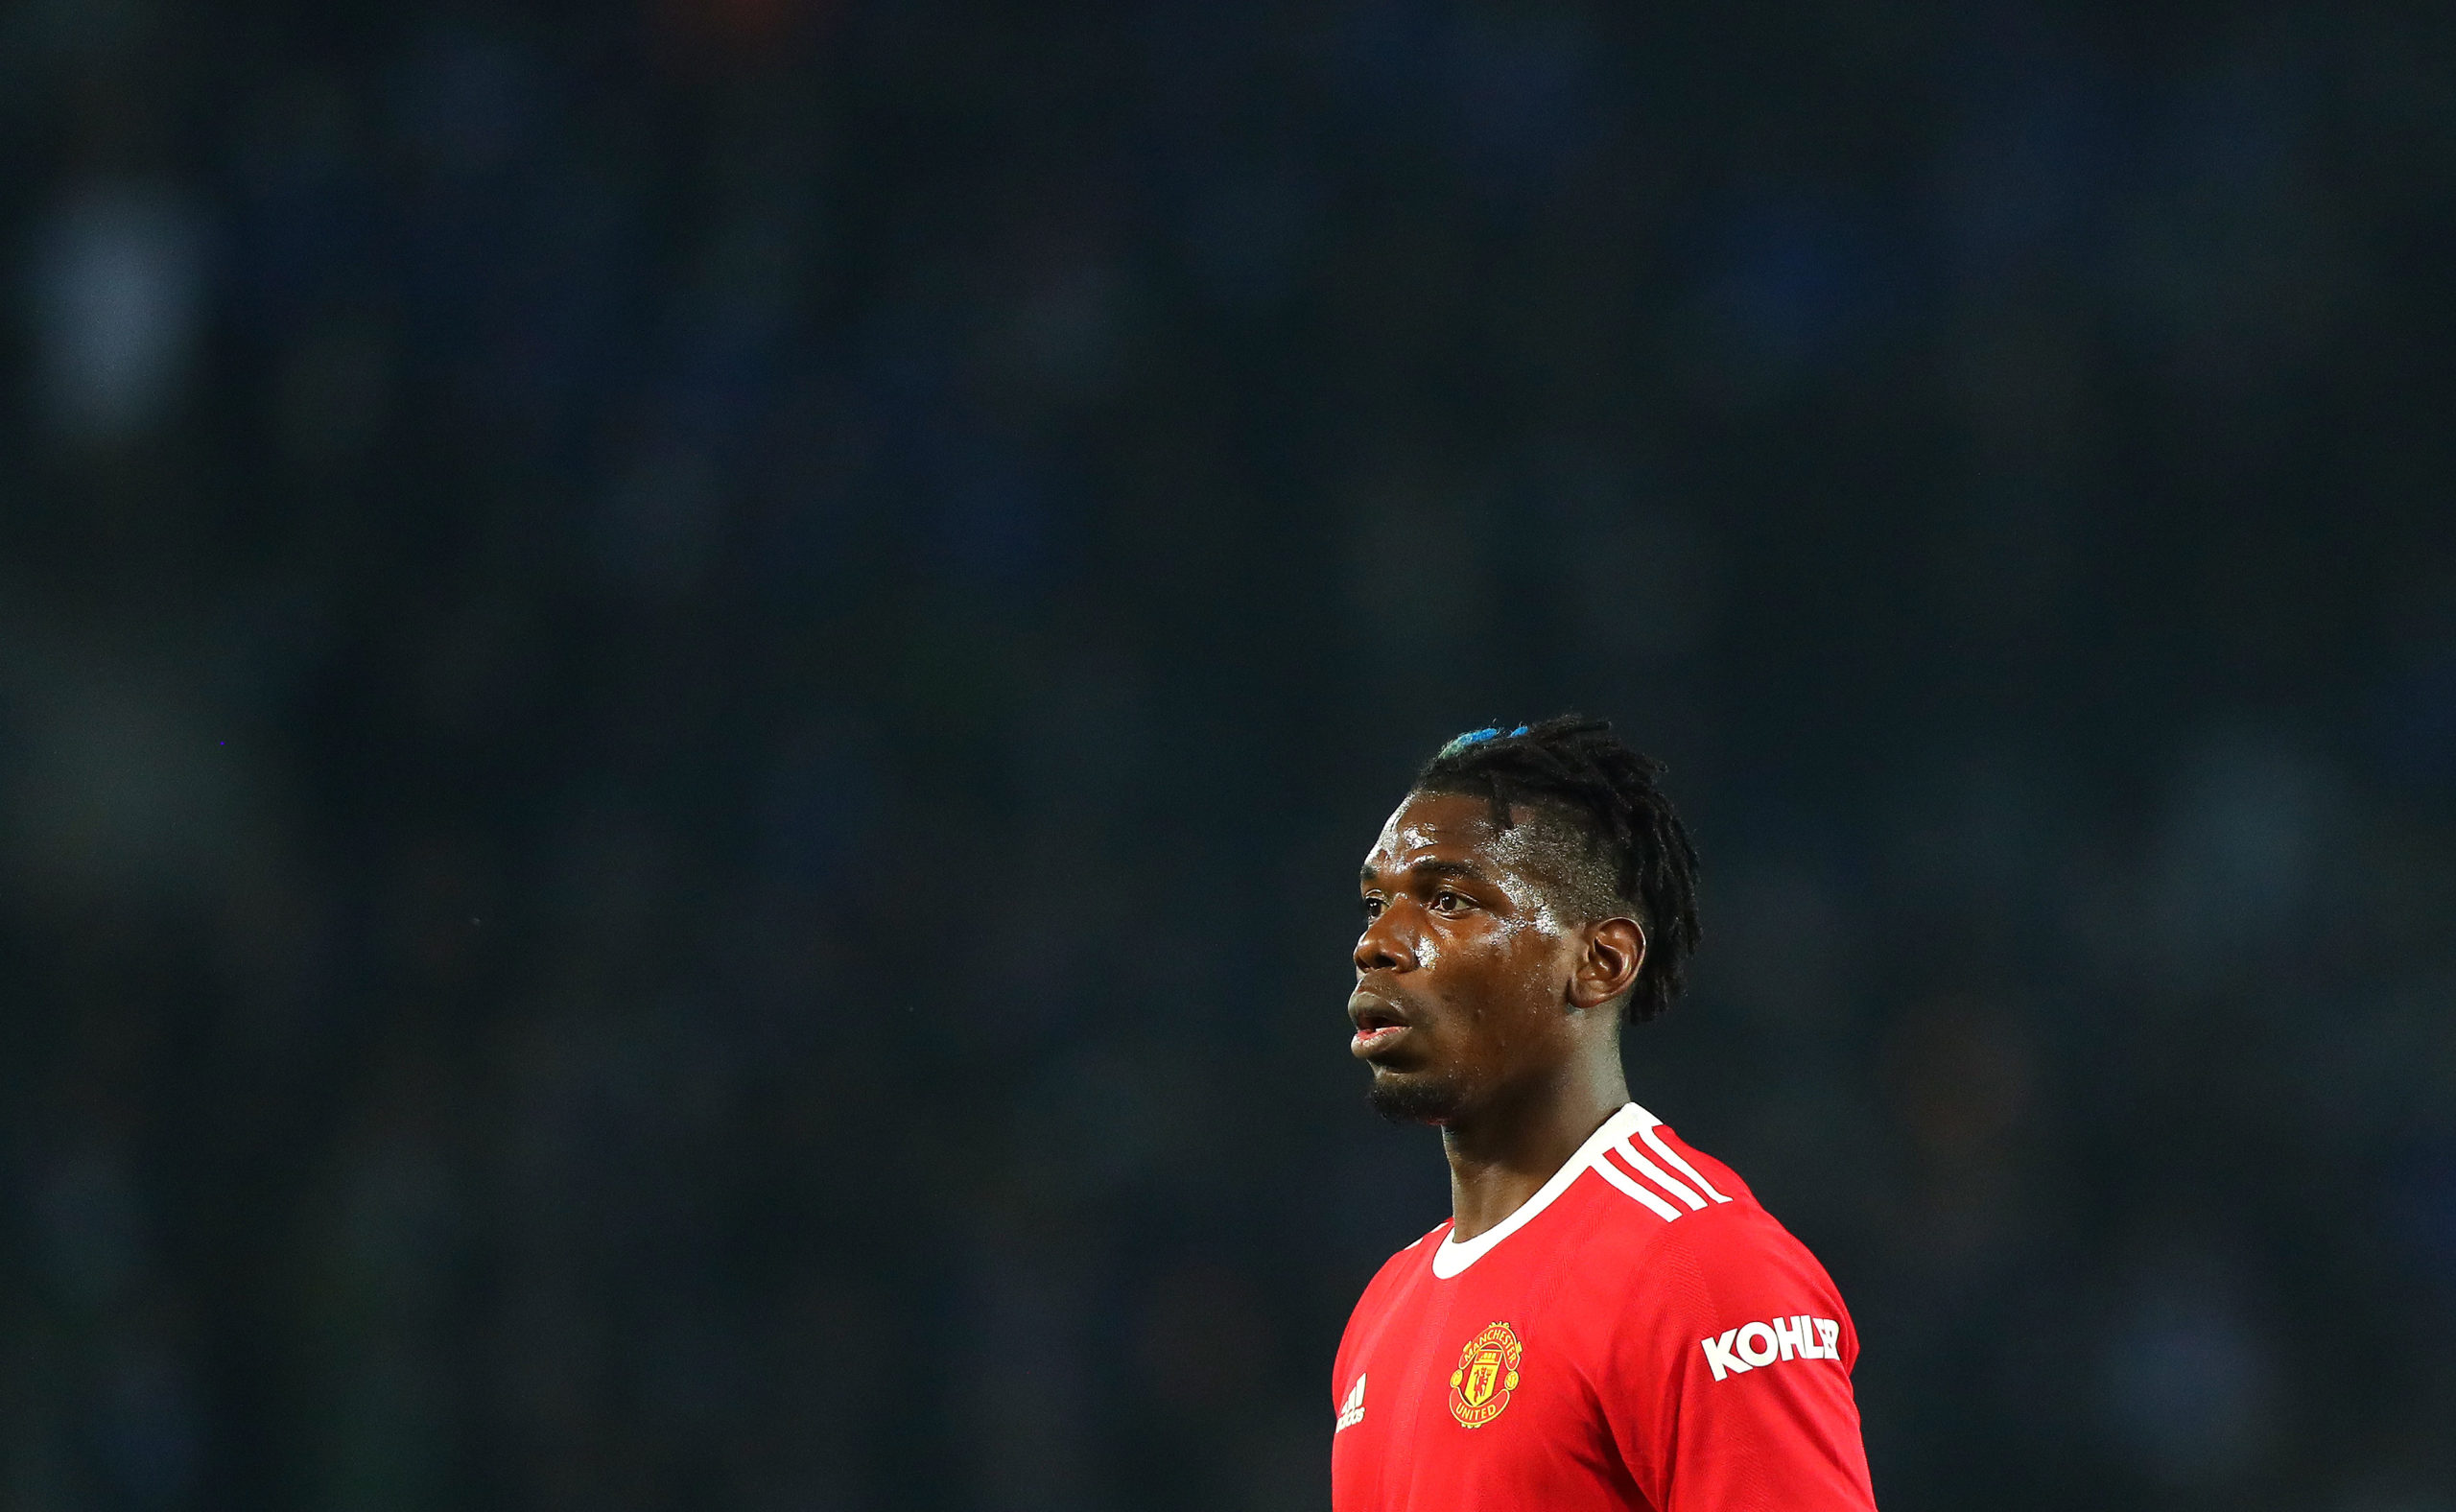 Paul Pogba dismisses reports of bumper contract offer